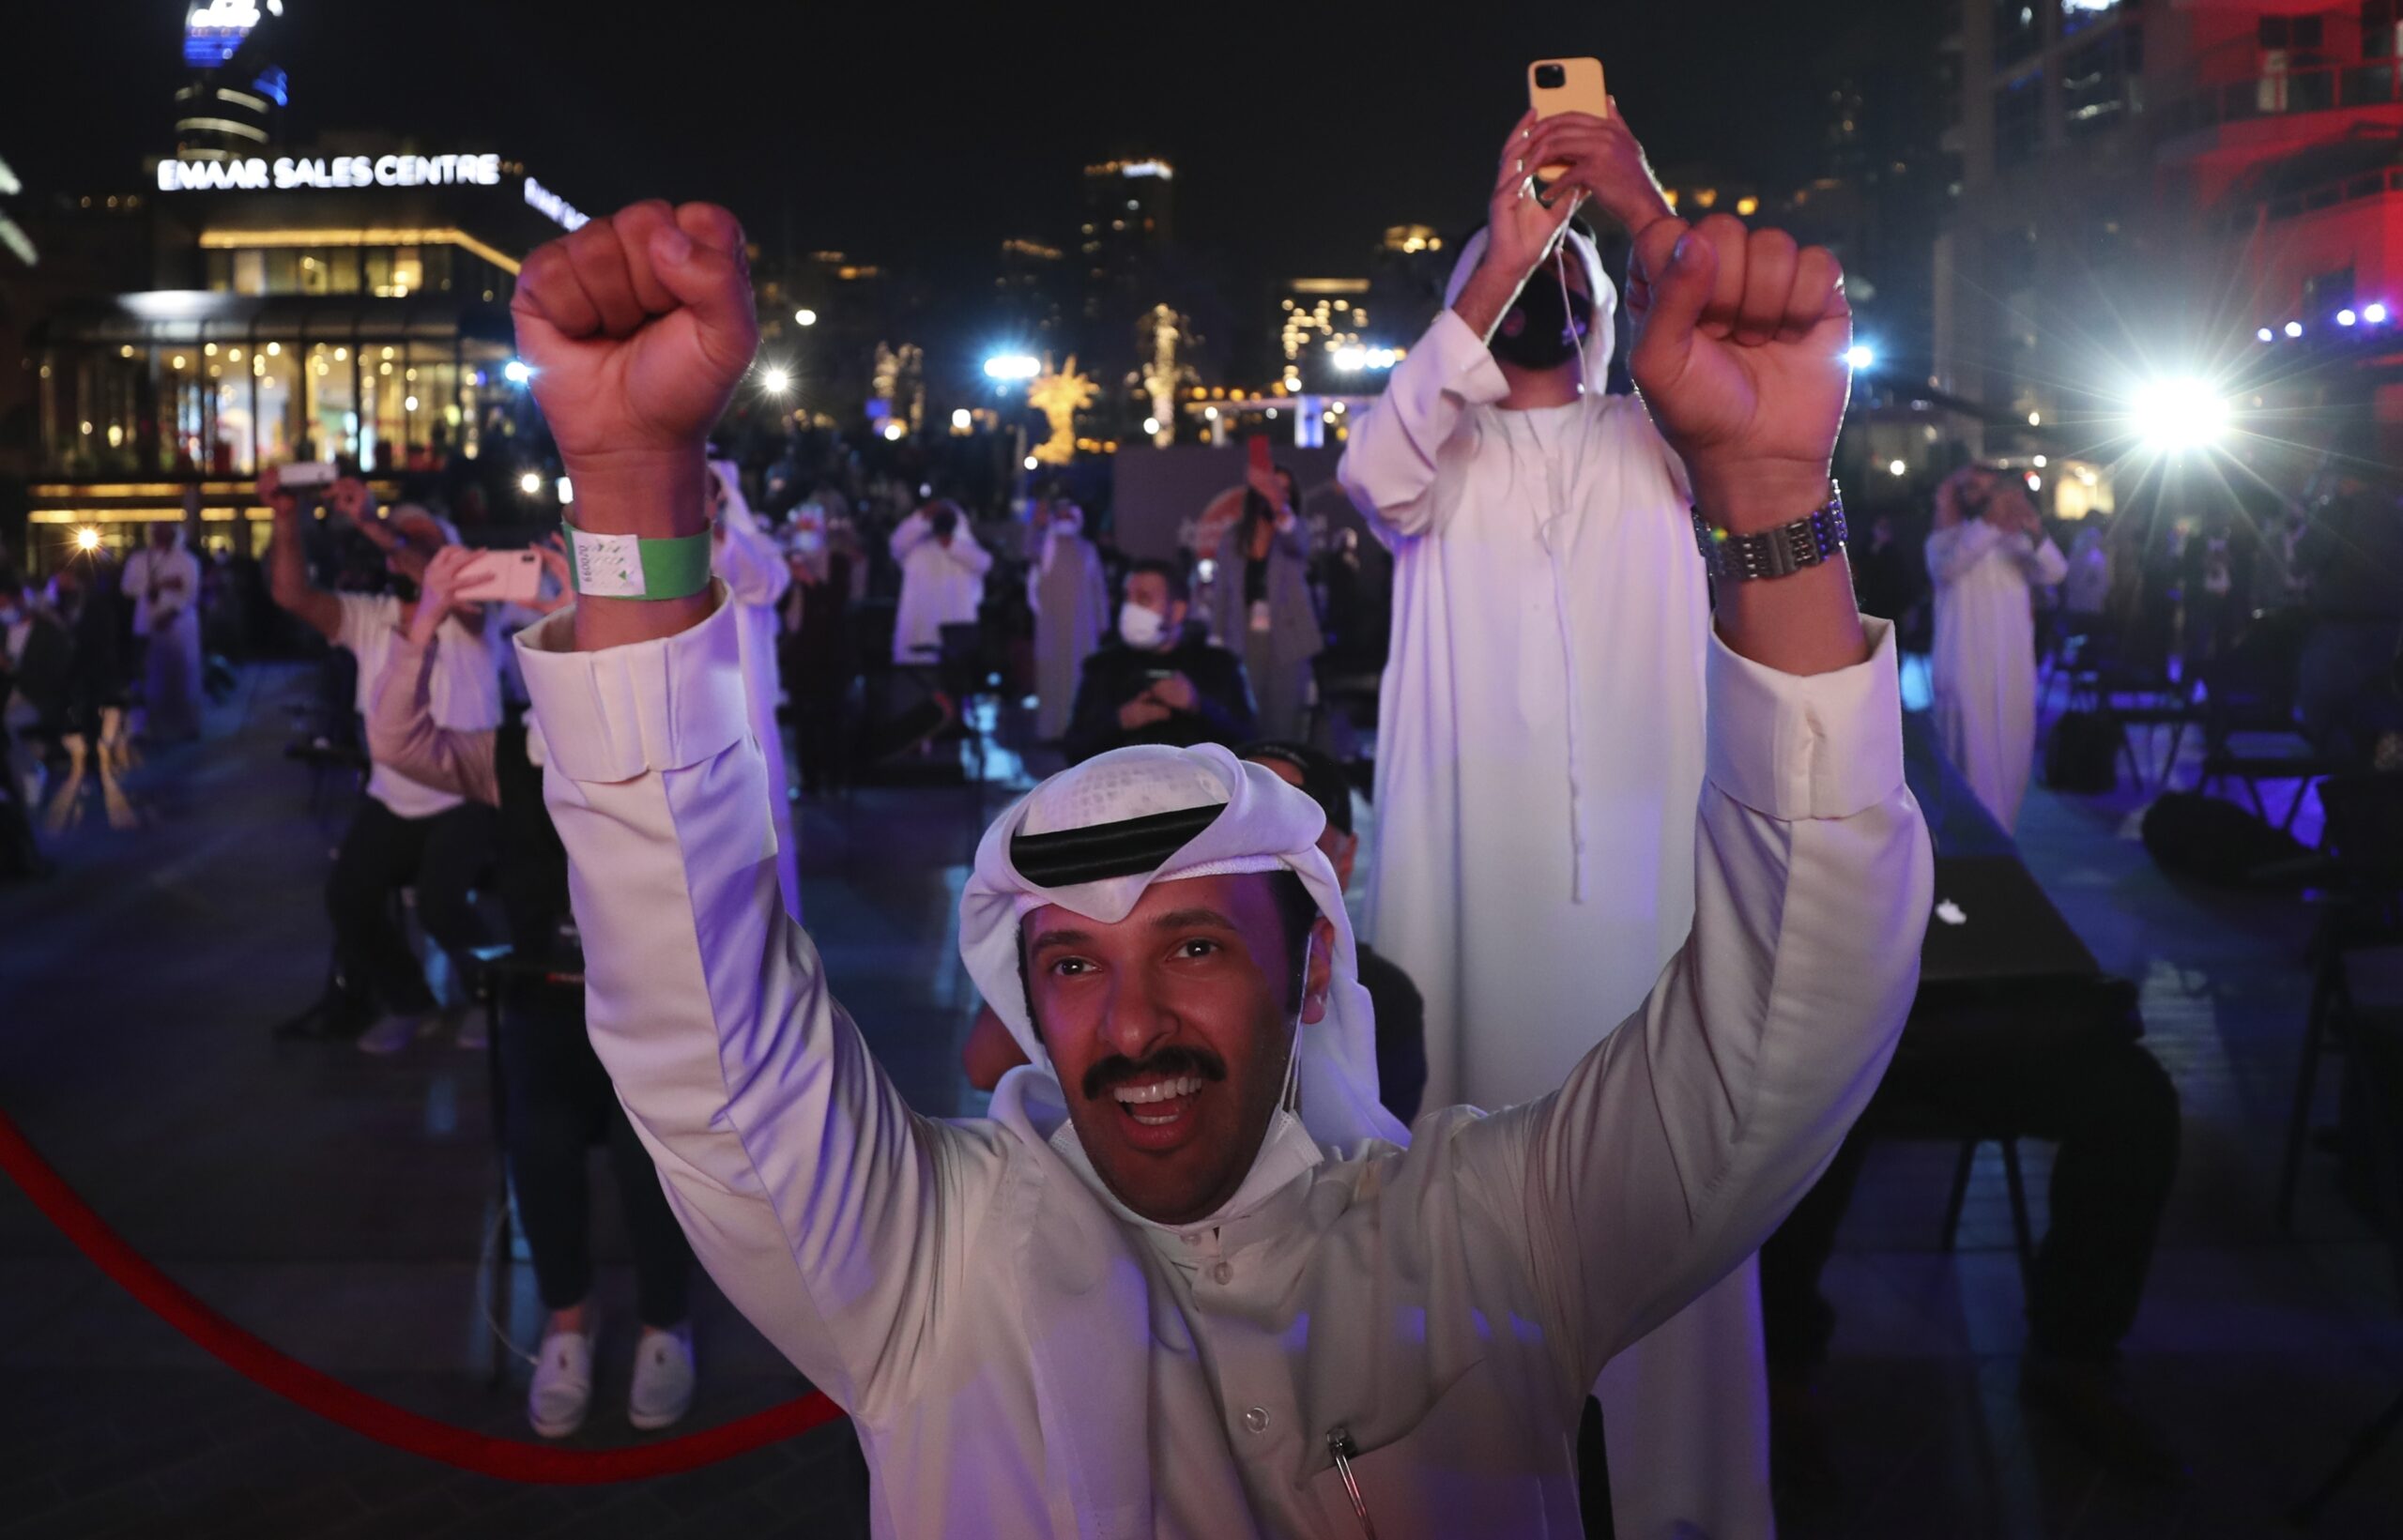 Emiratis celebrate after the Hope Probe enters Mars orbit as a part of Emirates Mars mission, in Dubai, United Arab Emirates, Tuesday, Feb. 9, 2021. The spacecraft from the United Arab Emirates swung into orbit around Mars in a triumph for the Arab world’s first interplanetary mission. It is the first of three robotic explorers arriving at the red planet over the next week and a half. (AP Photo/Kamran Jebreili)